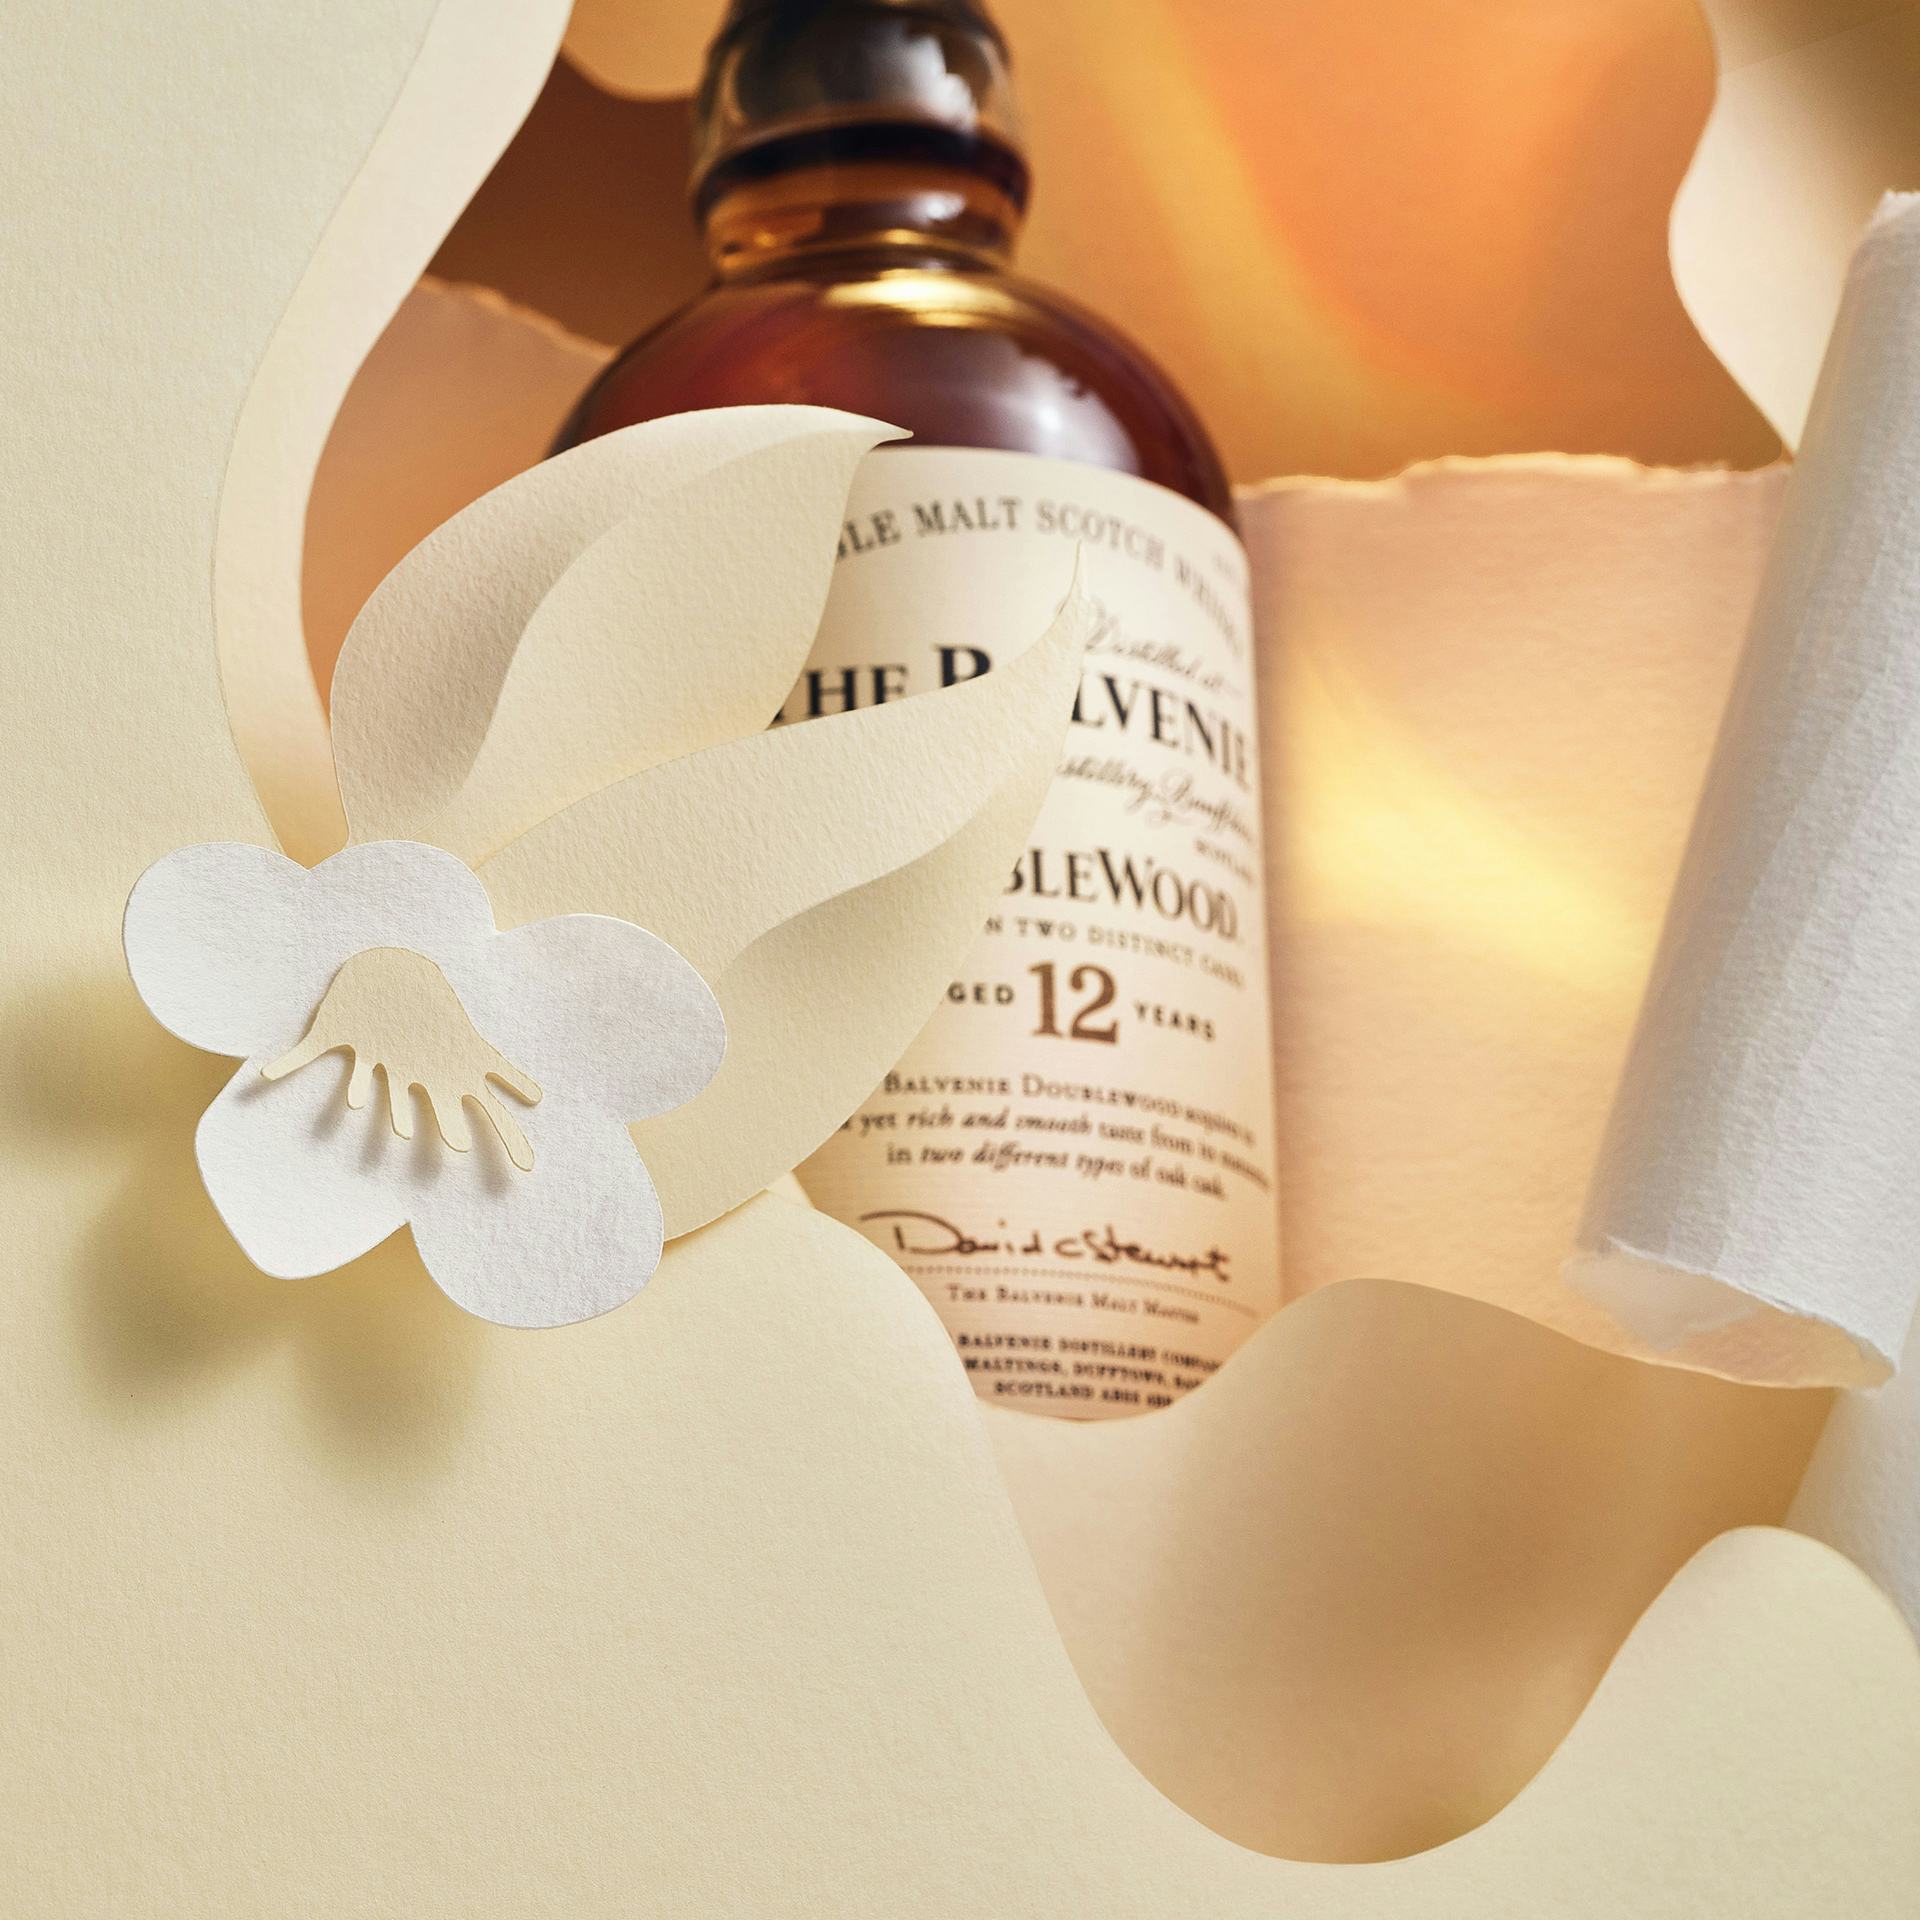 The Balvenie DoubleWood12 in a paper display with golden light and a paper flower